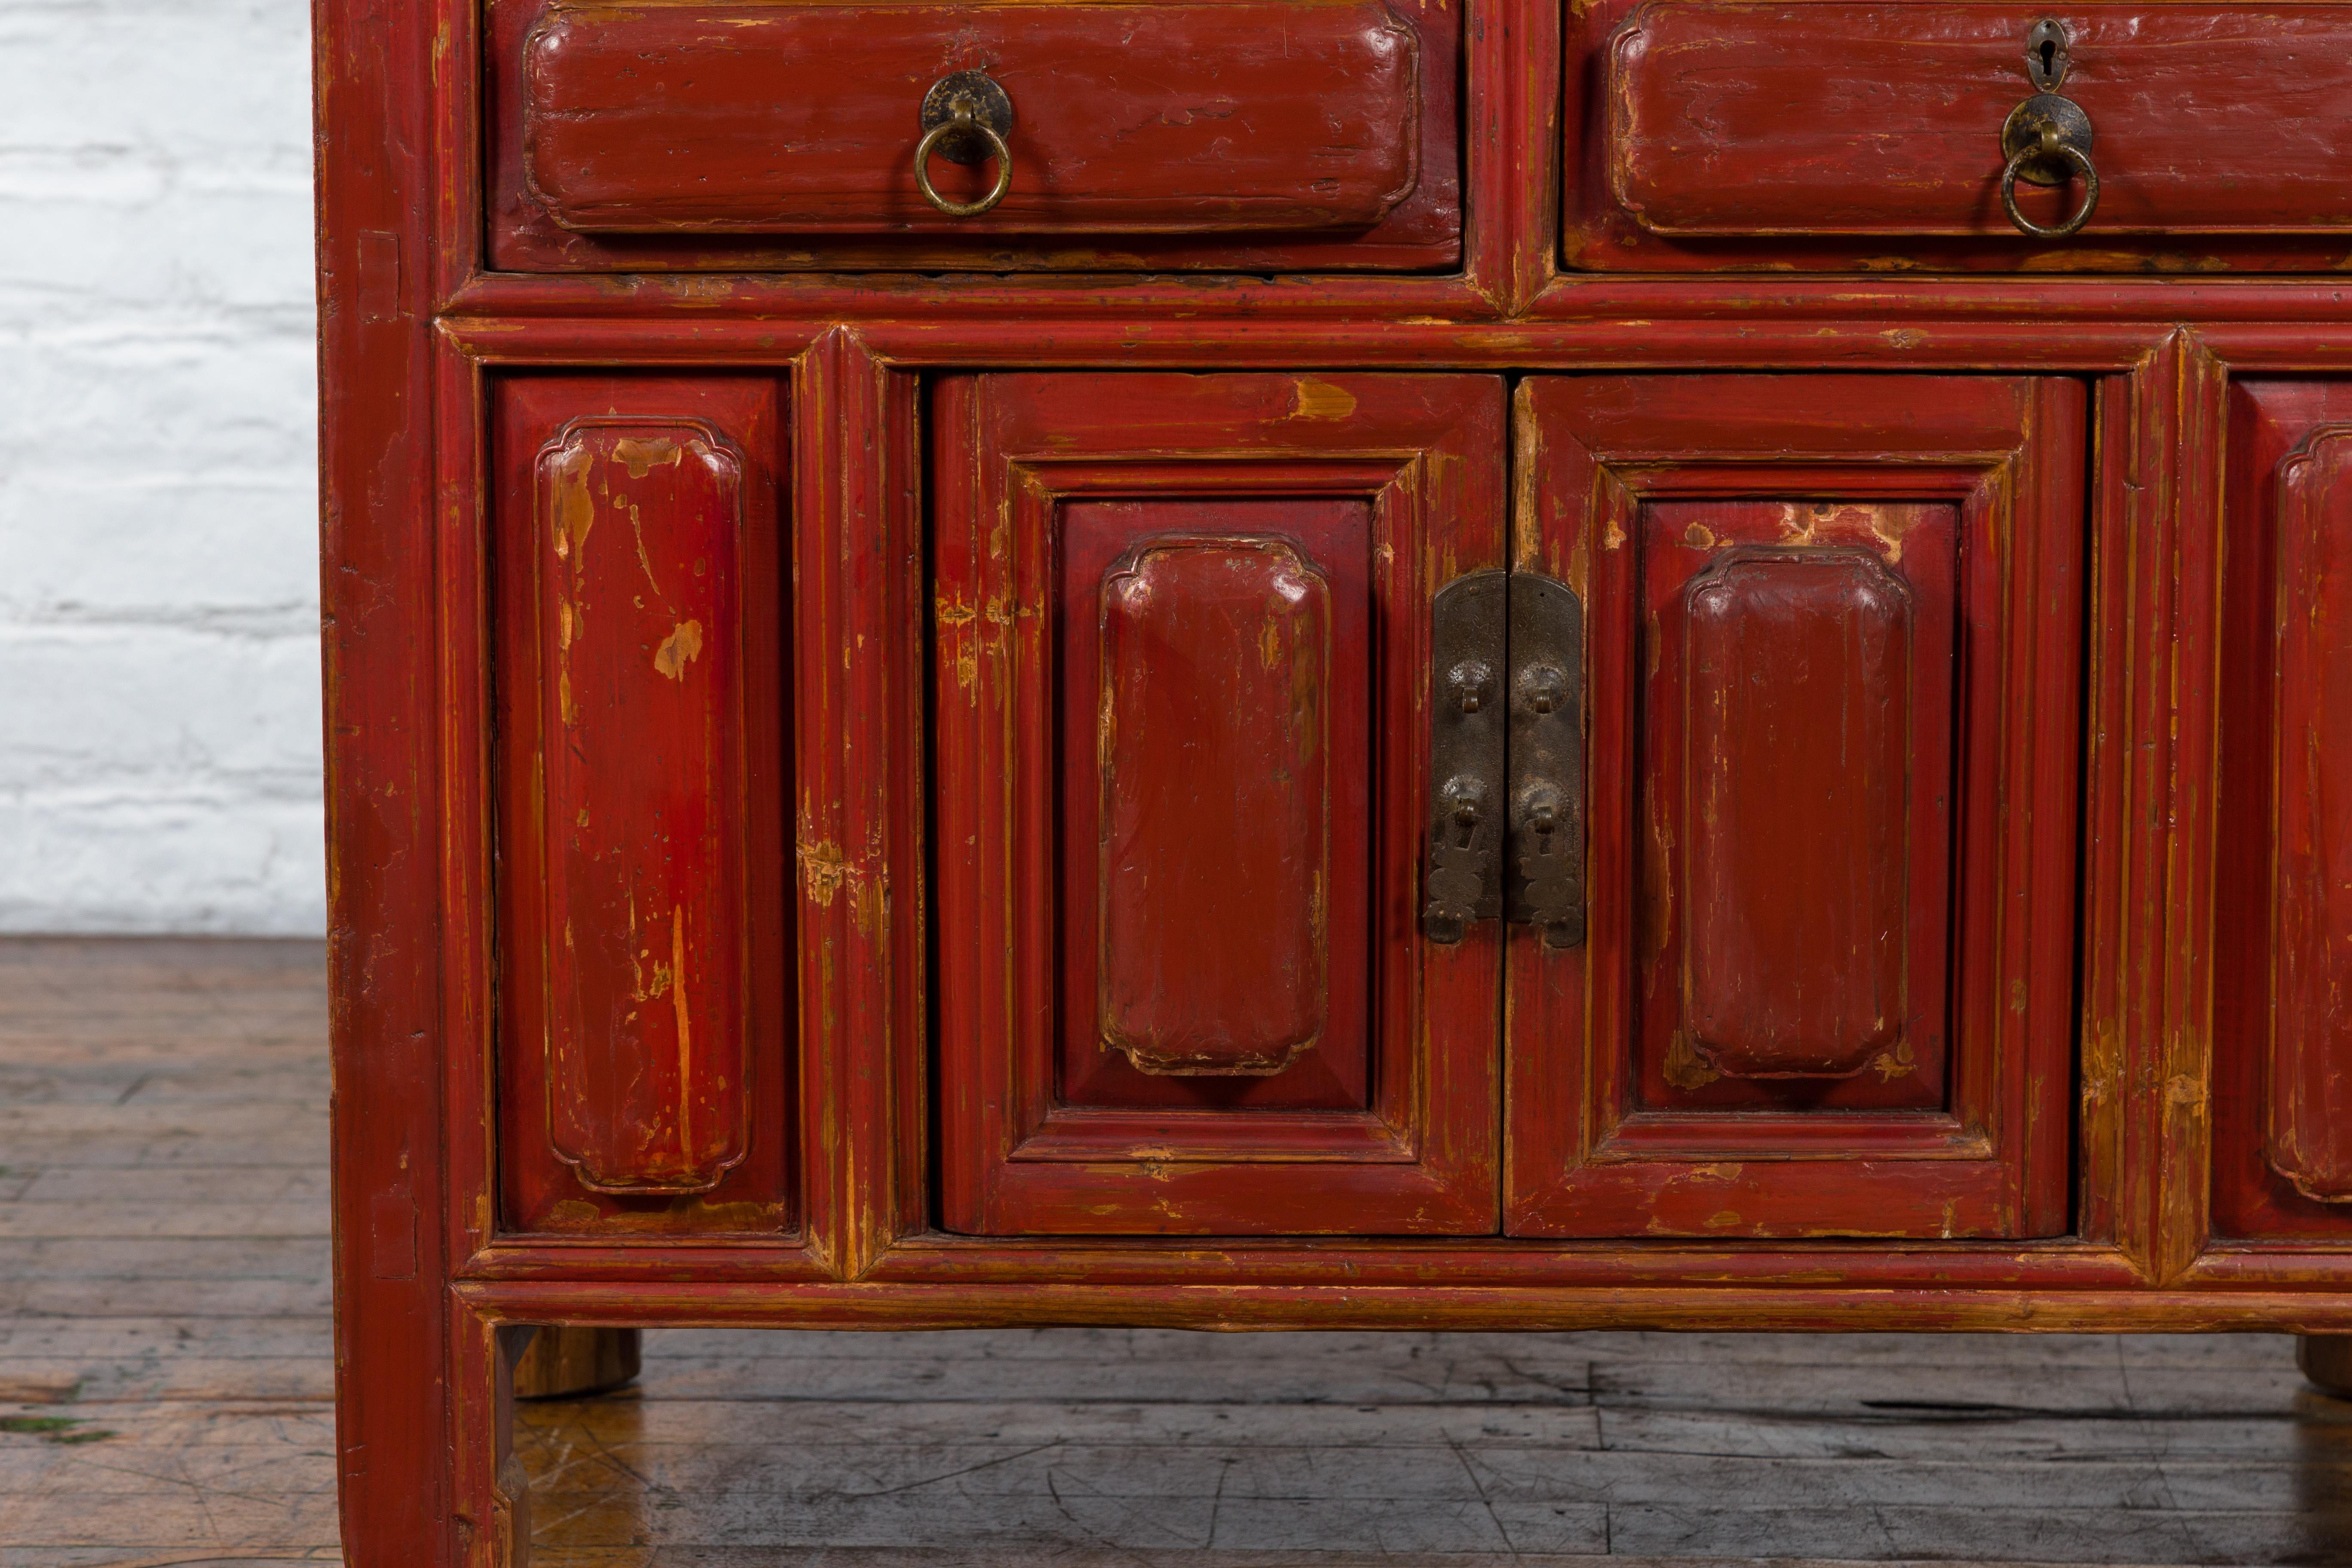 Late Qing Dynasty Period Chinese Red Lacquer Compound Cabinet with Raised Panels For Sale 3